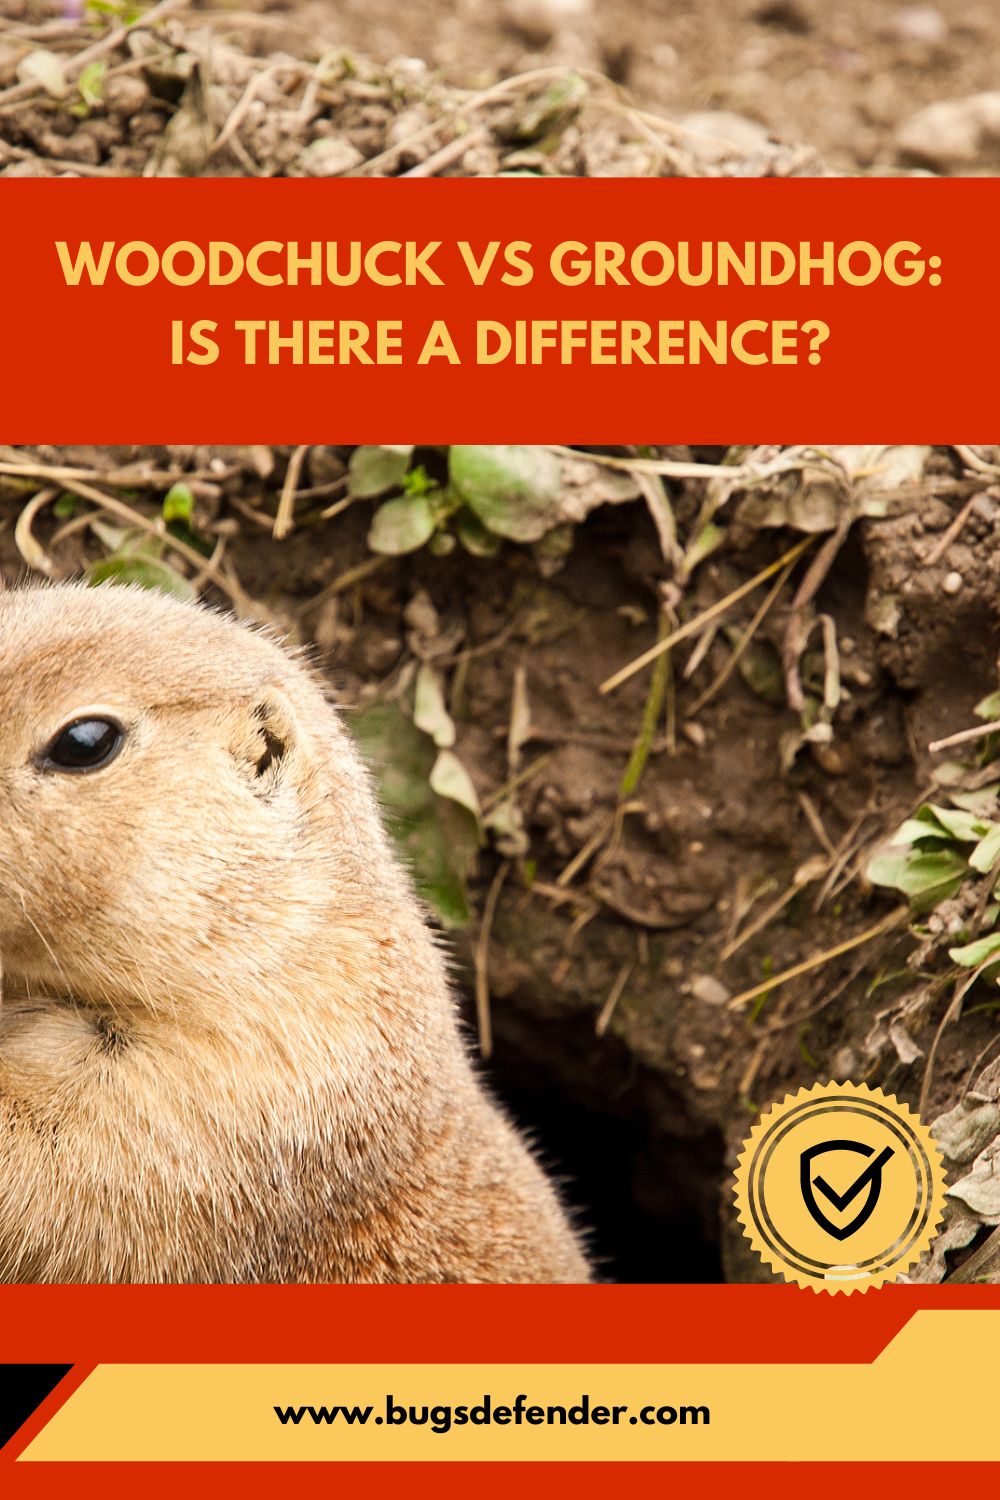 Woodchuck VS Groundhog Is There a Difference pin2